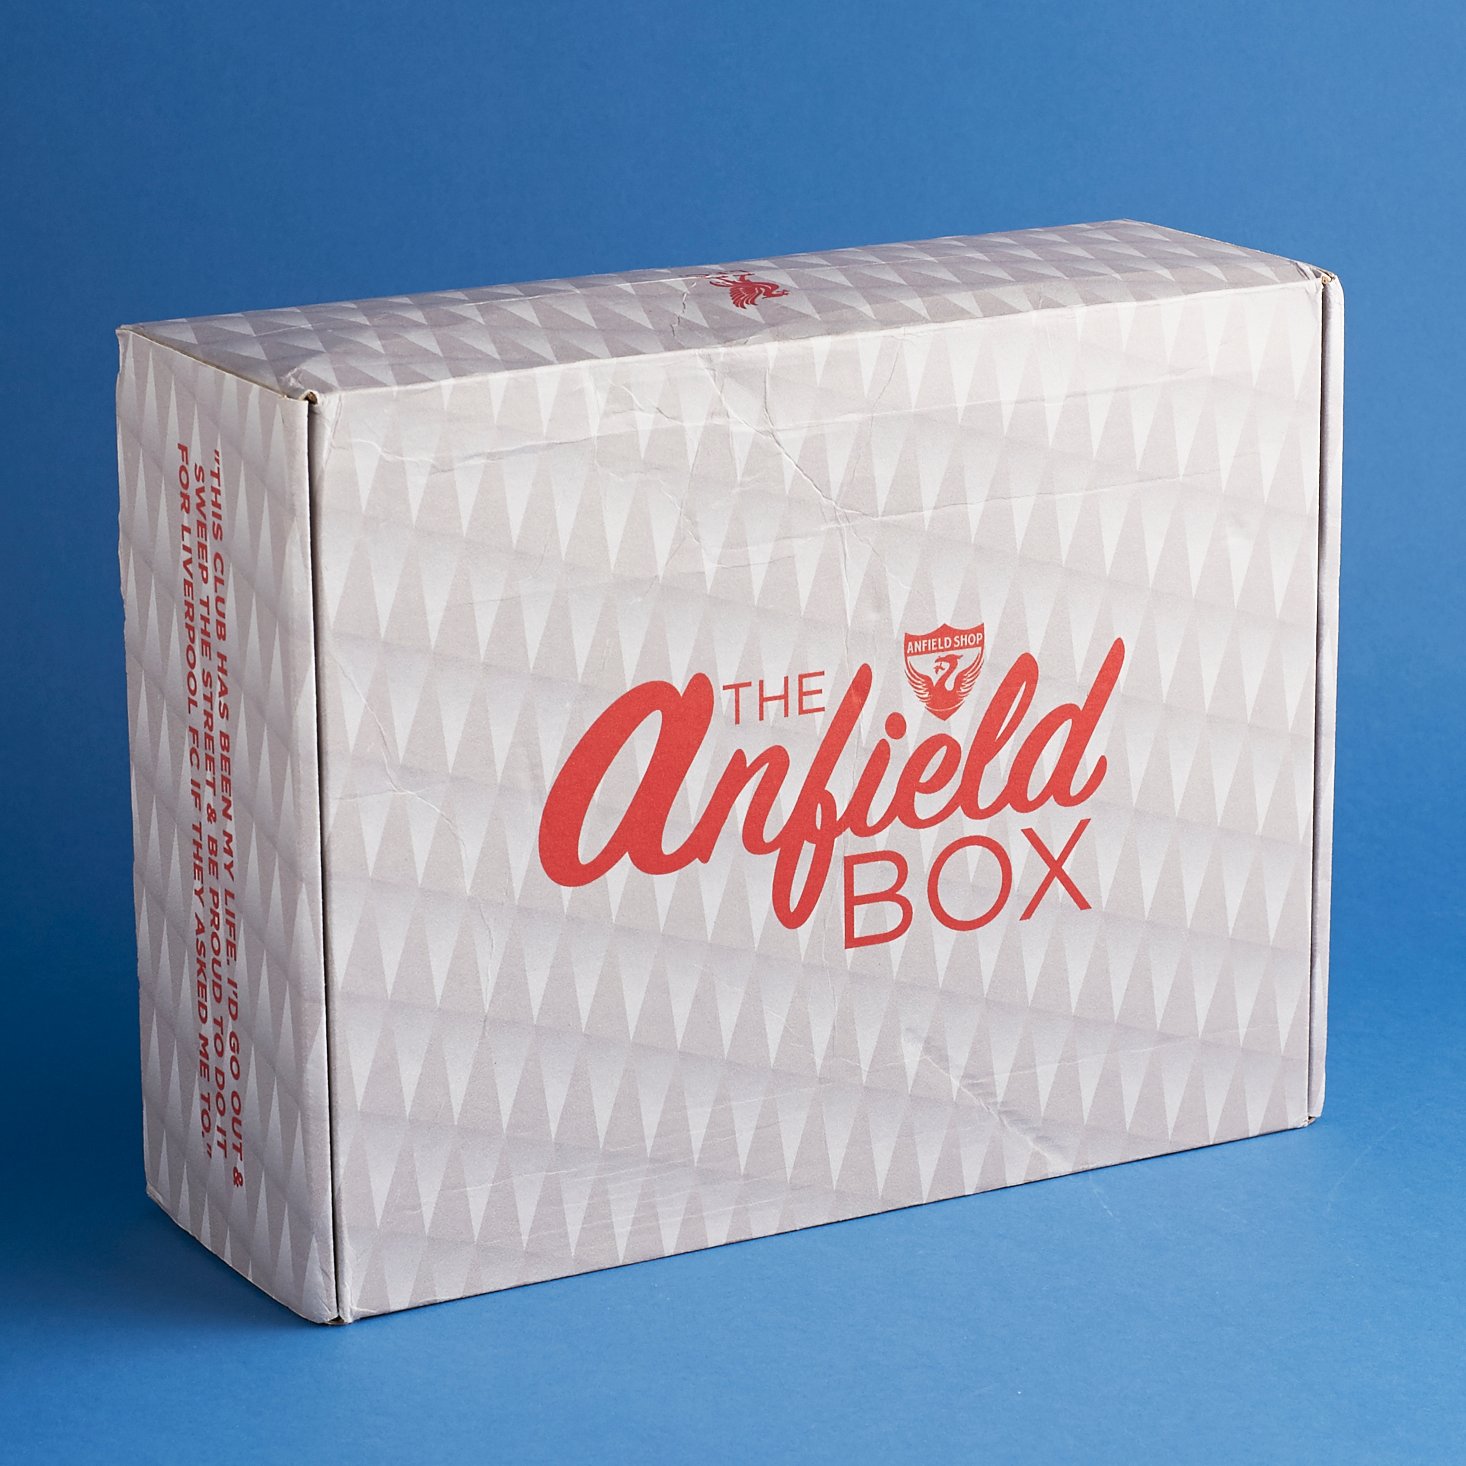 The Anfield Box Subscription Box Review – February 2017